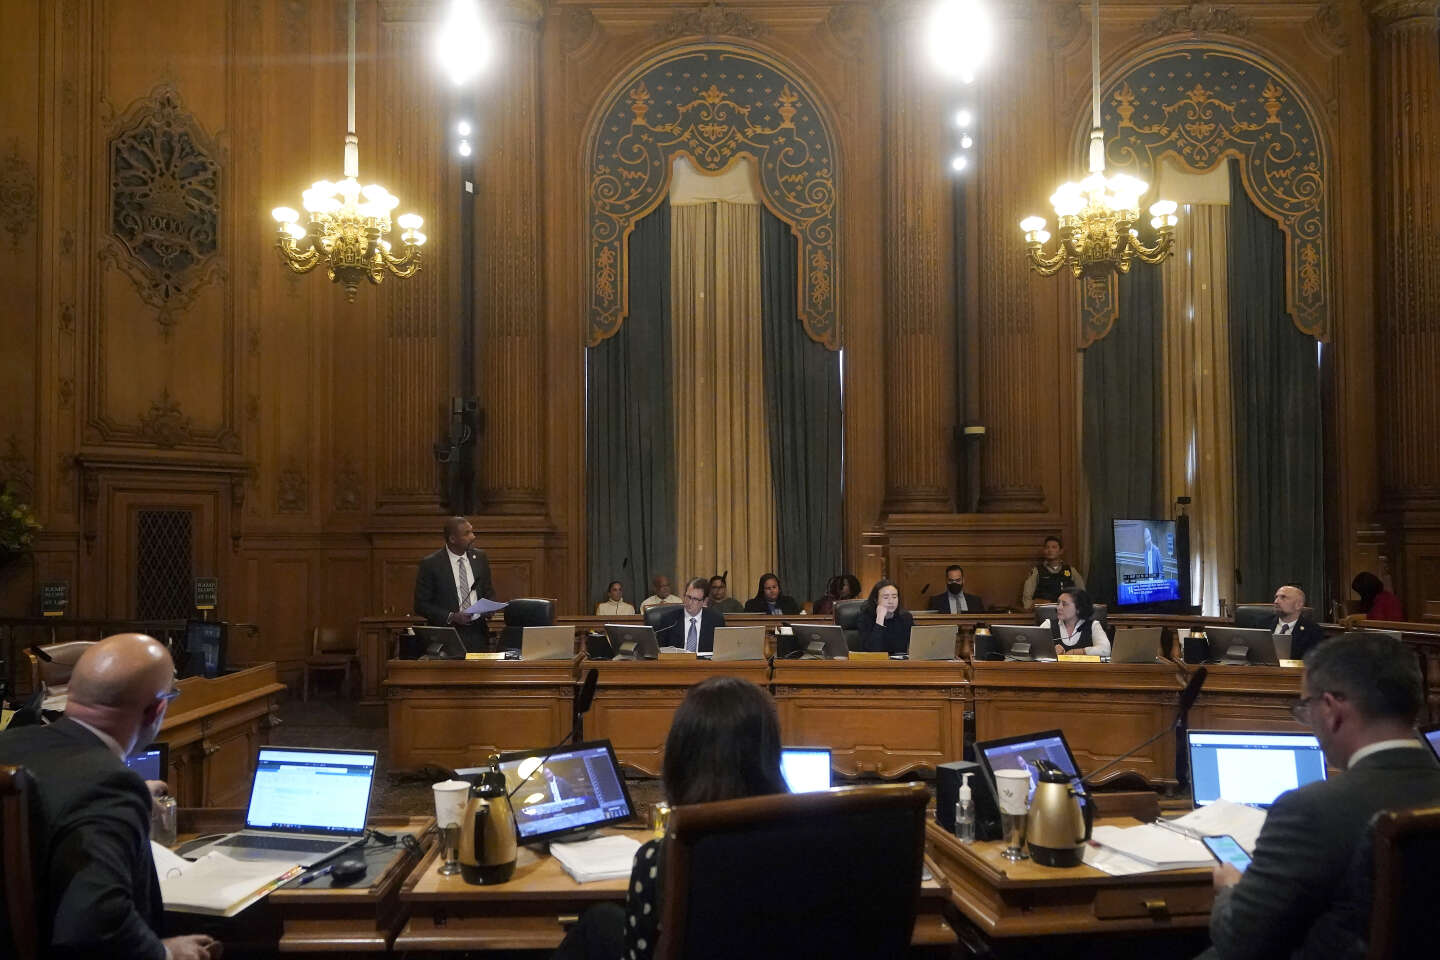 In San Francisco, controversy over a vast plan to “repair” systemic racism